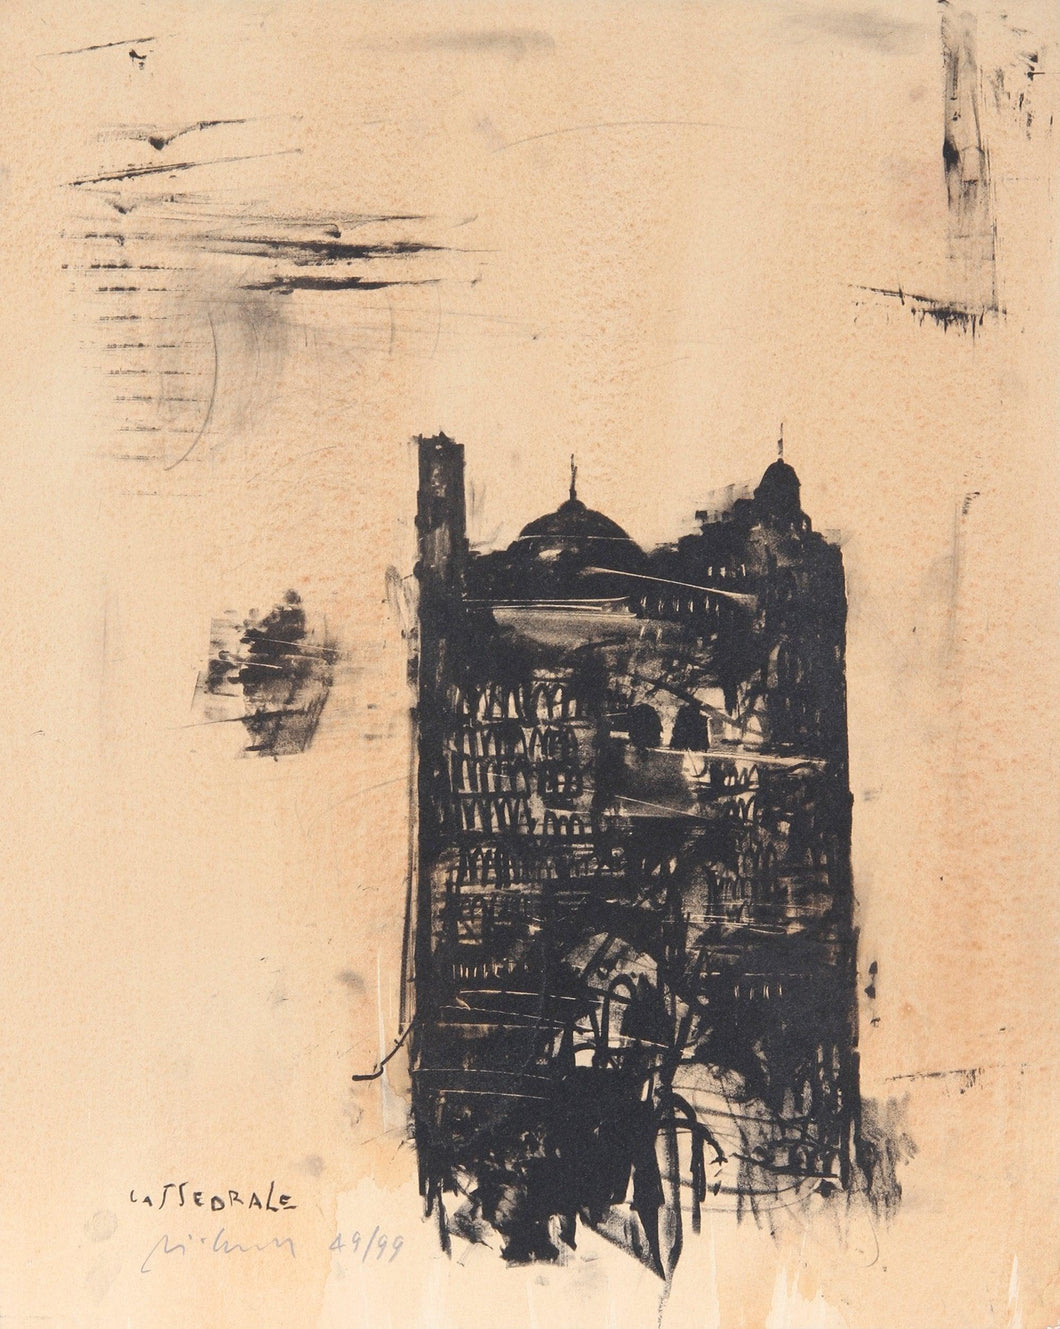 Cattedrale Lithograph | Piero Pizzi Cannella,{{product.type}}